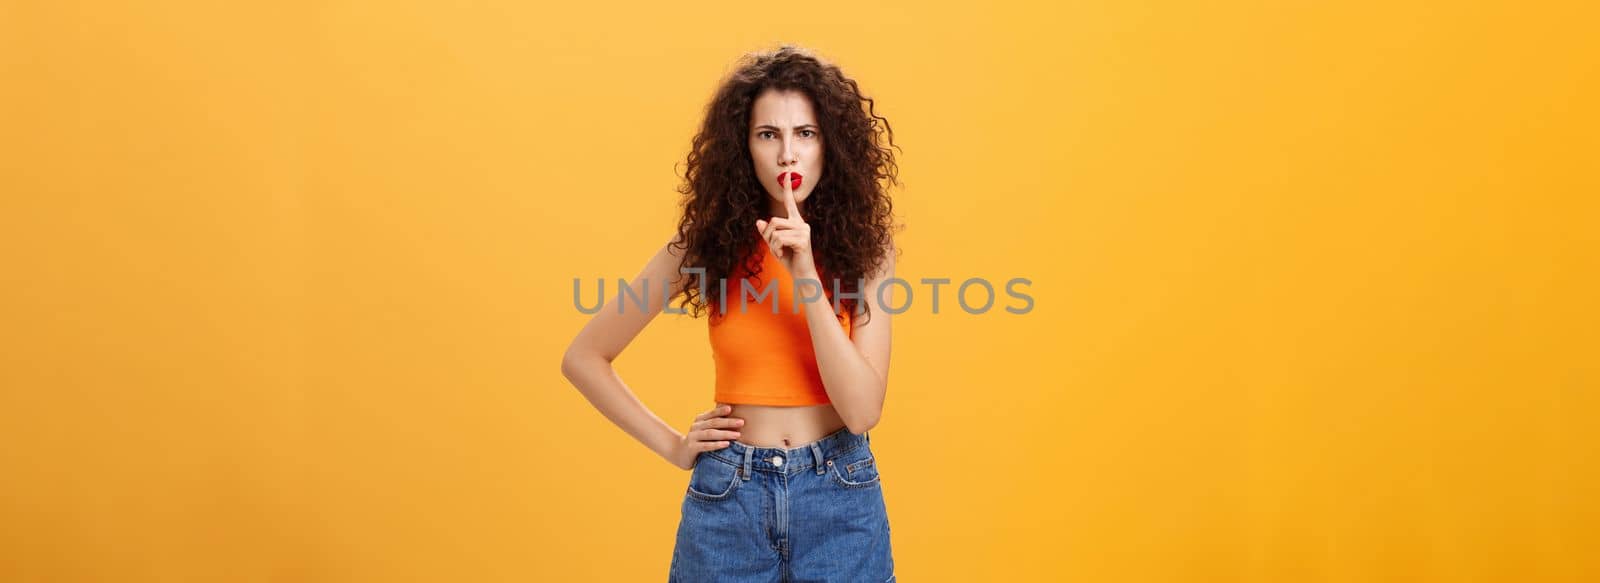 Sister displeased sibling saying cursing words standing serious and strict over orange background in stylish outfit shushing at camera saying shh with index finger over mouth demanding obey rules by Benzoix